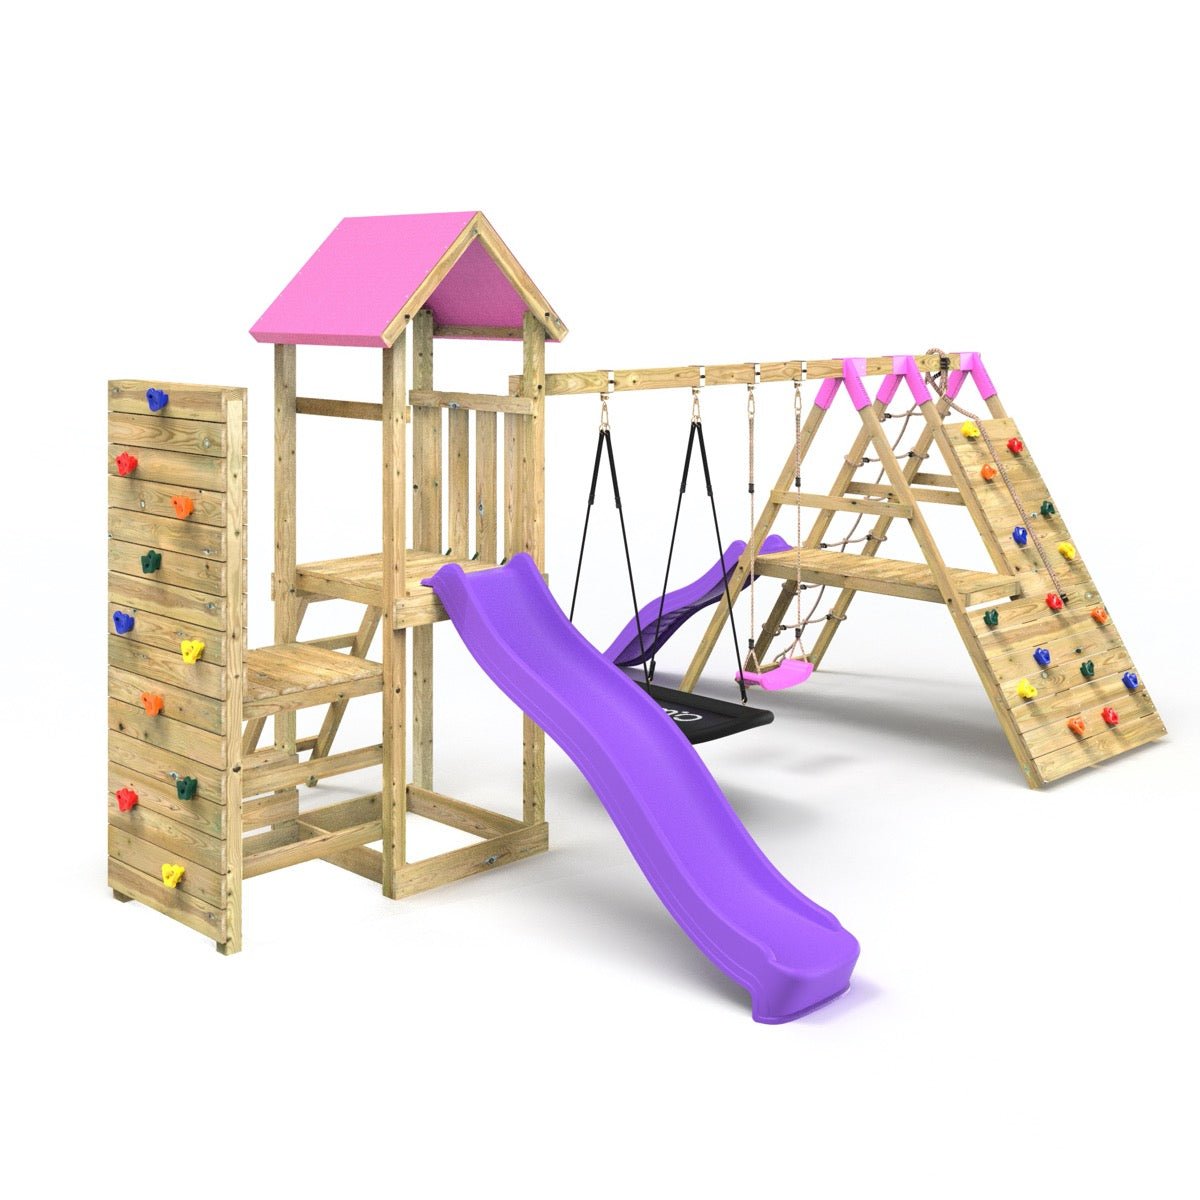 Rebo Wooden Climbing Frame with Vertical Rock Wall, Swing Set and Slide - San Luis+ Pink